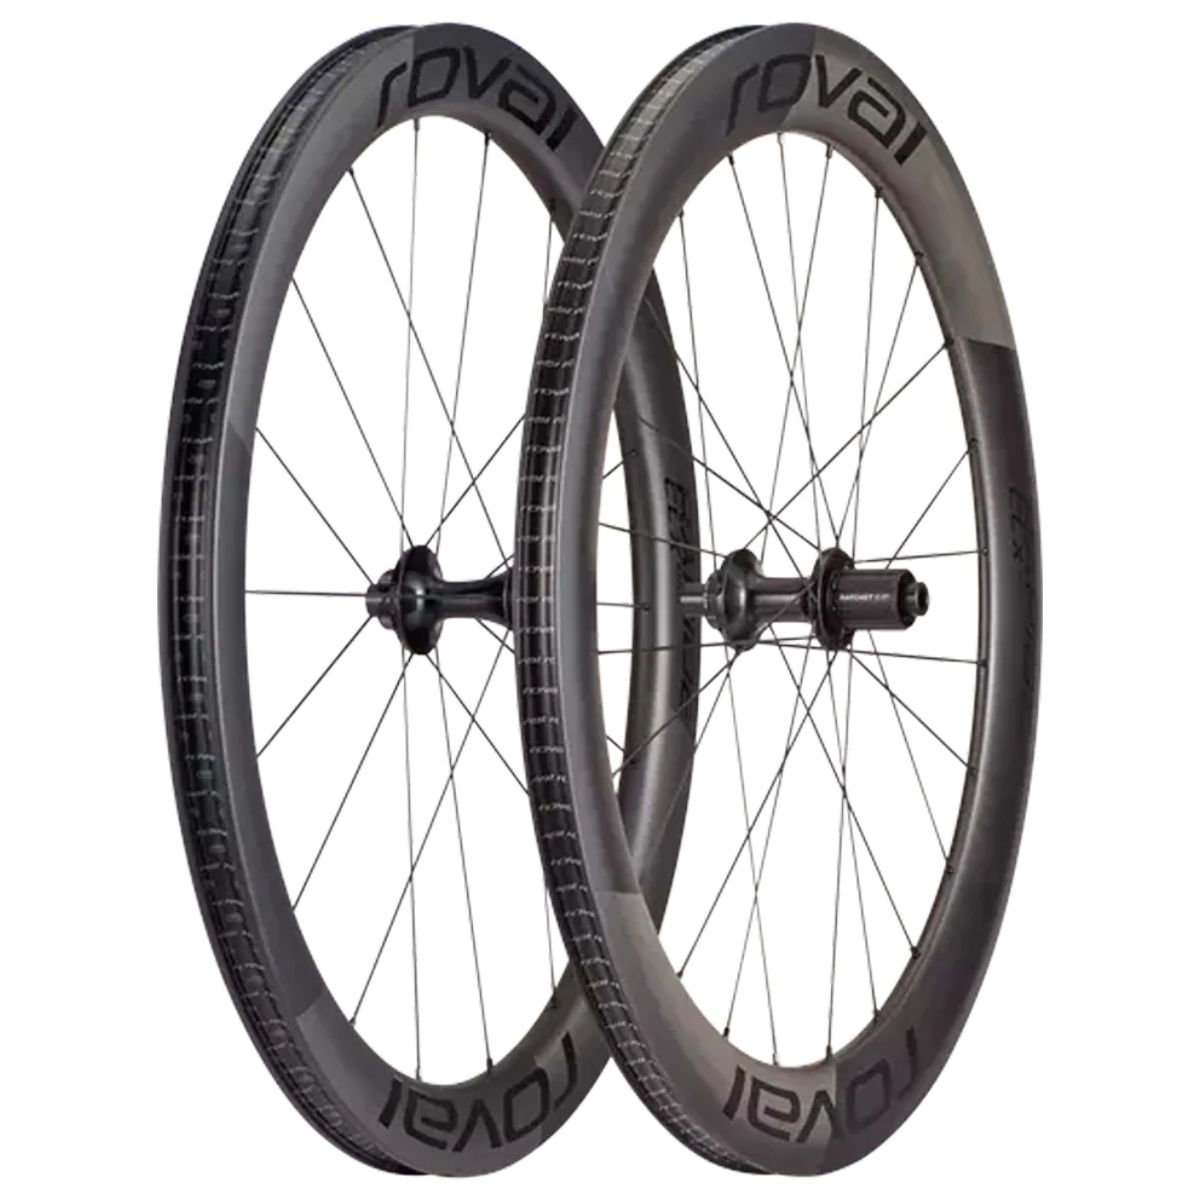 Roval Rapide CLX II Demonstrator Wheels HG Tubeless Disc Carbon/Black Pair with Tires